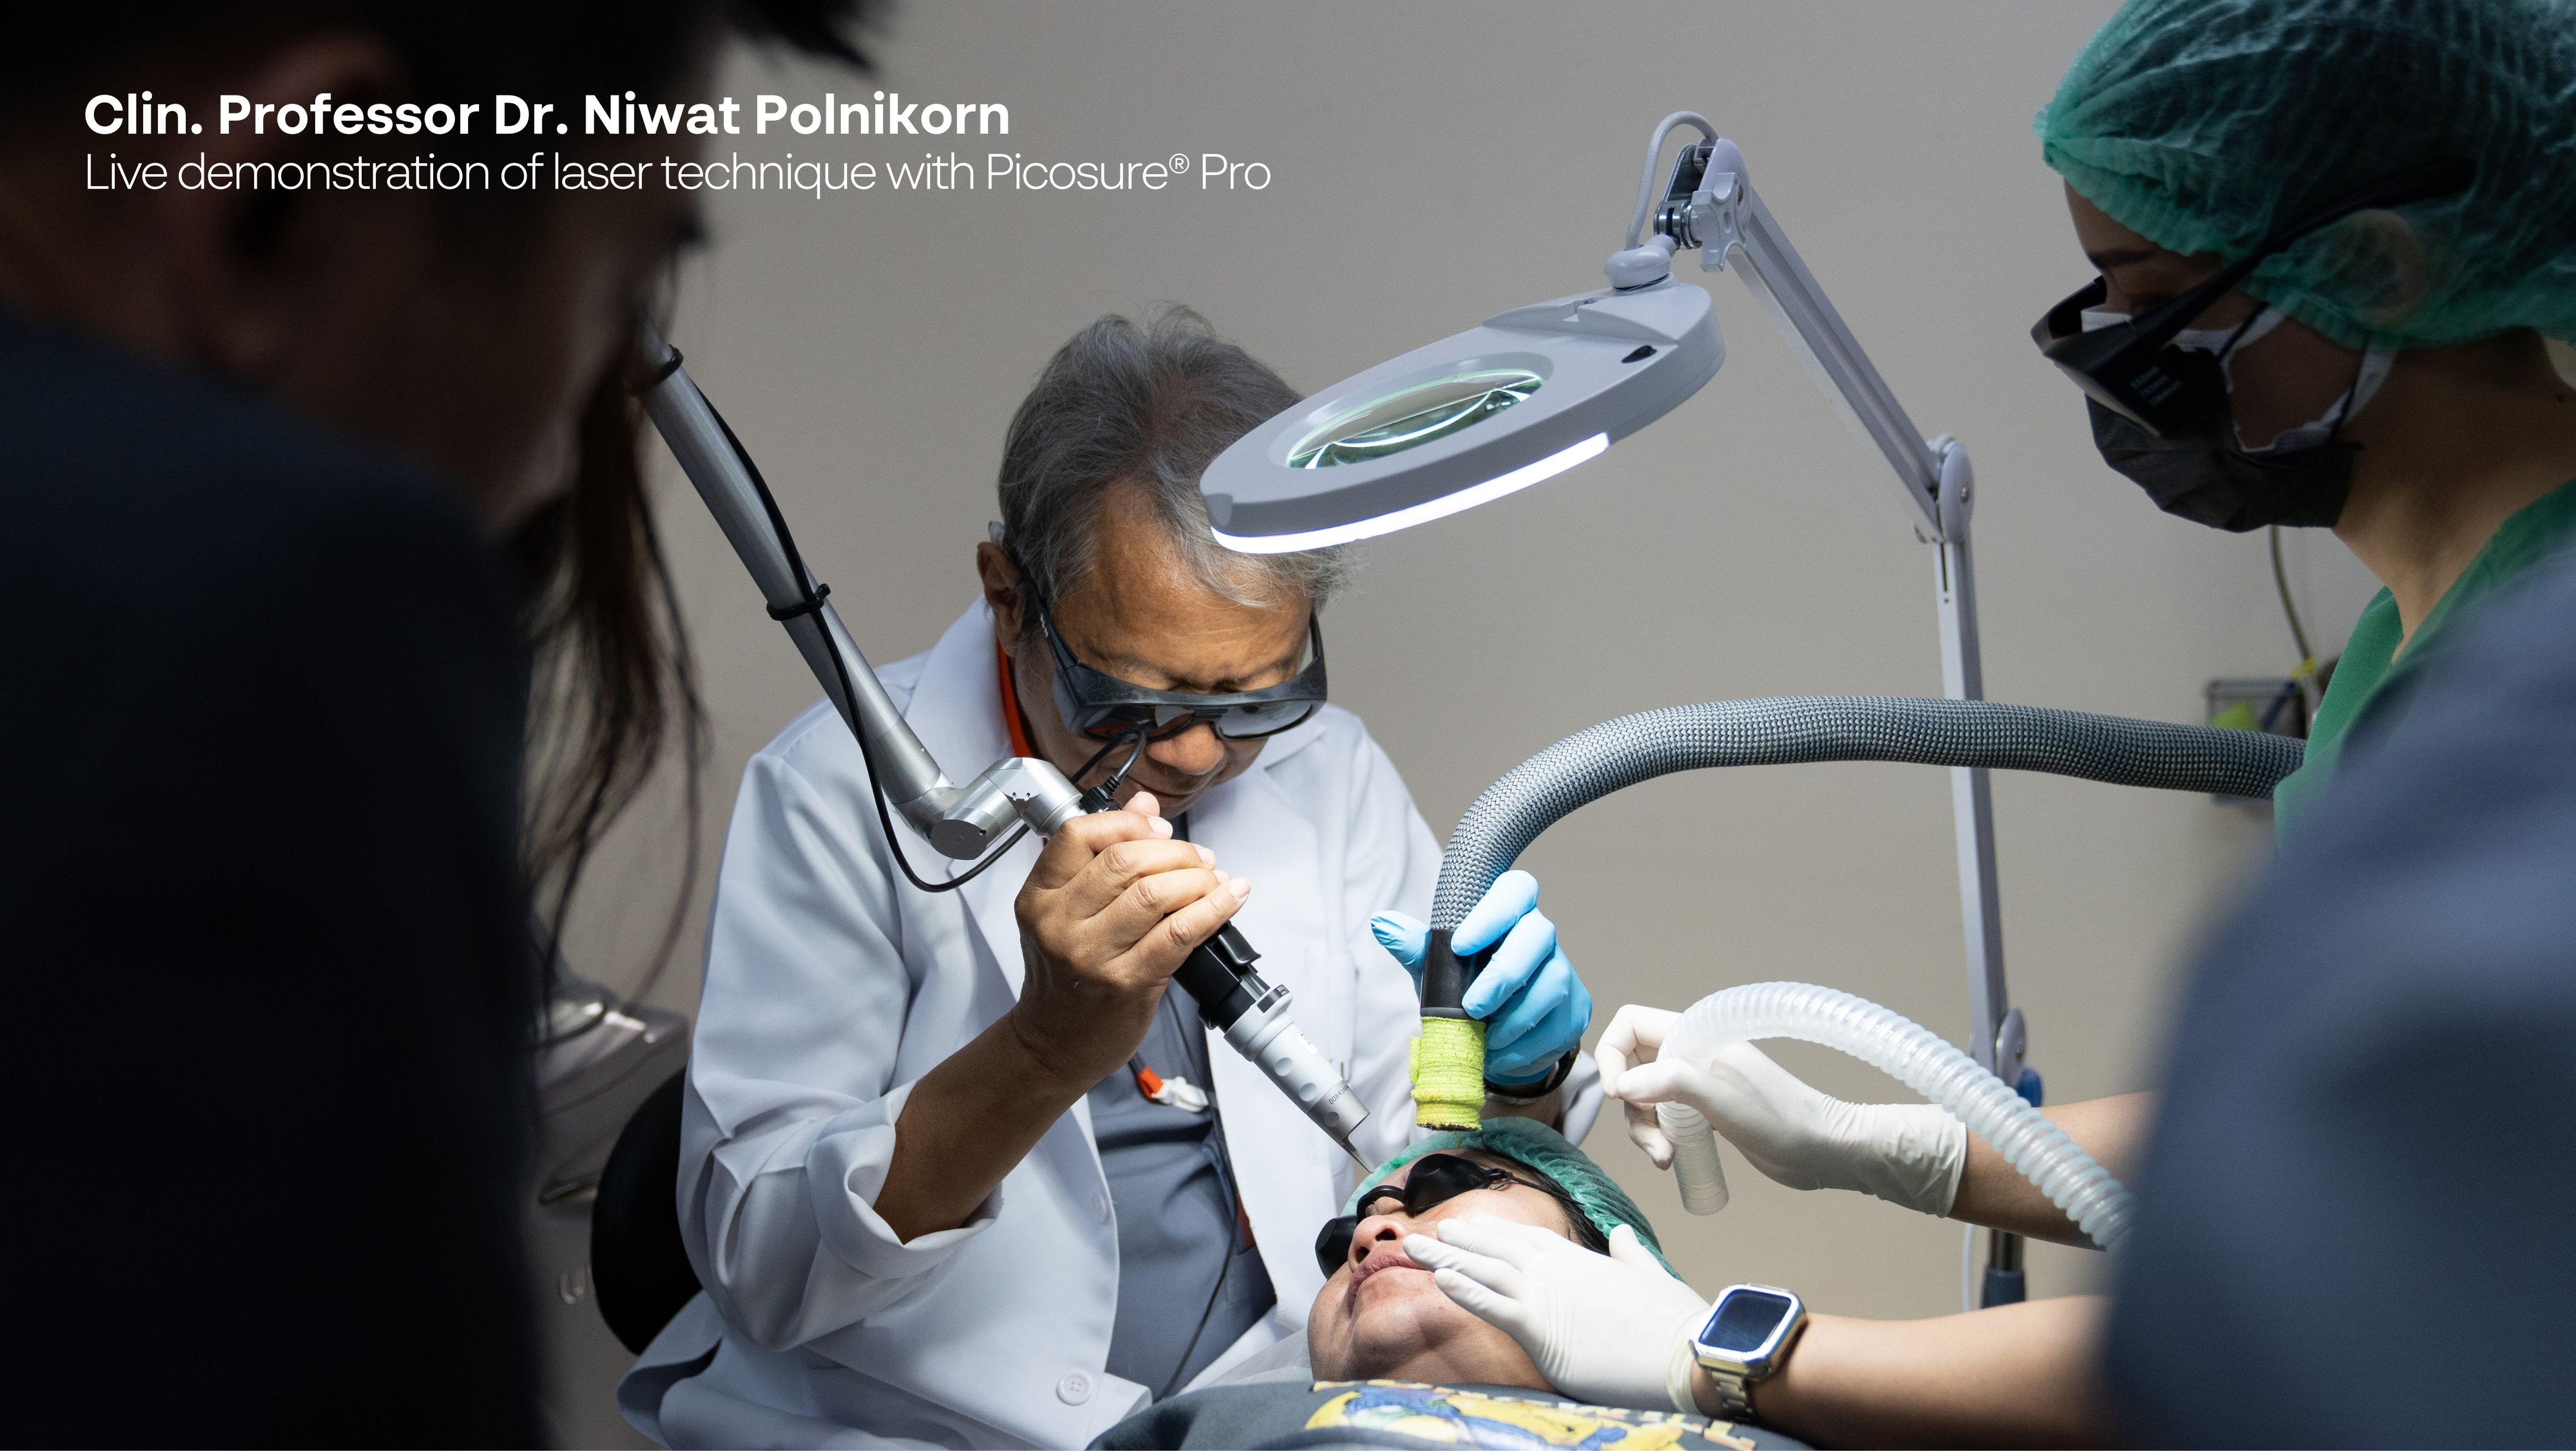 Cynosure joins hands with Clin. Prof. Dr. Niwat Polnikorn to advance Laser Dermatology in APAC